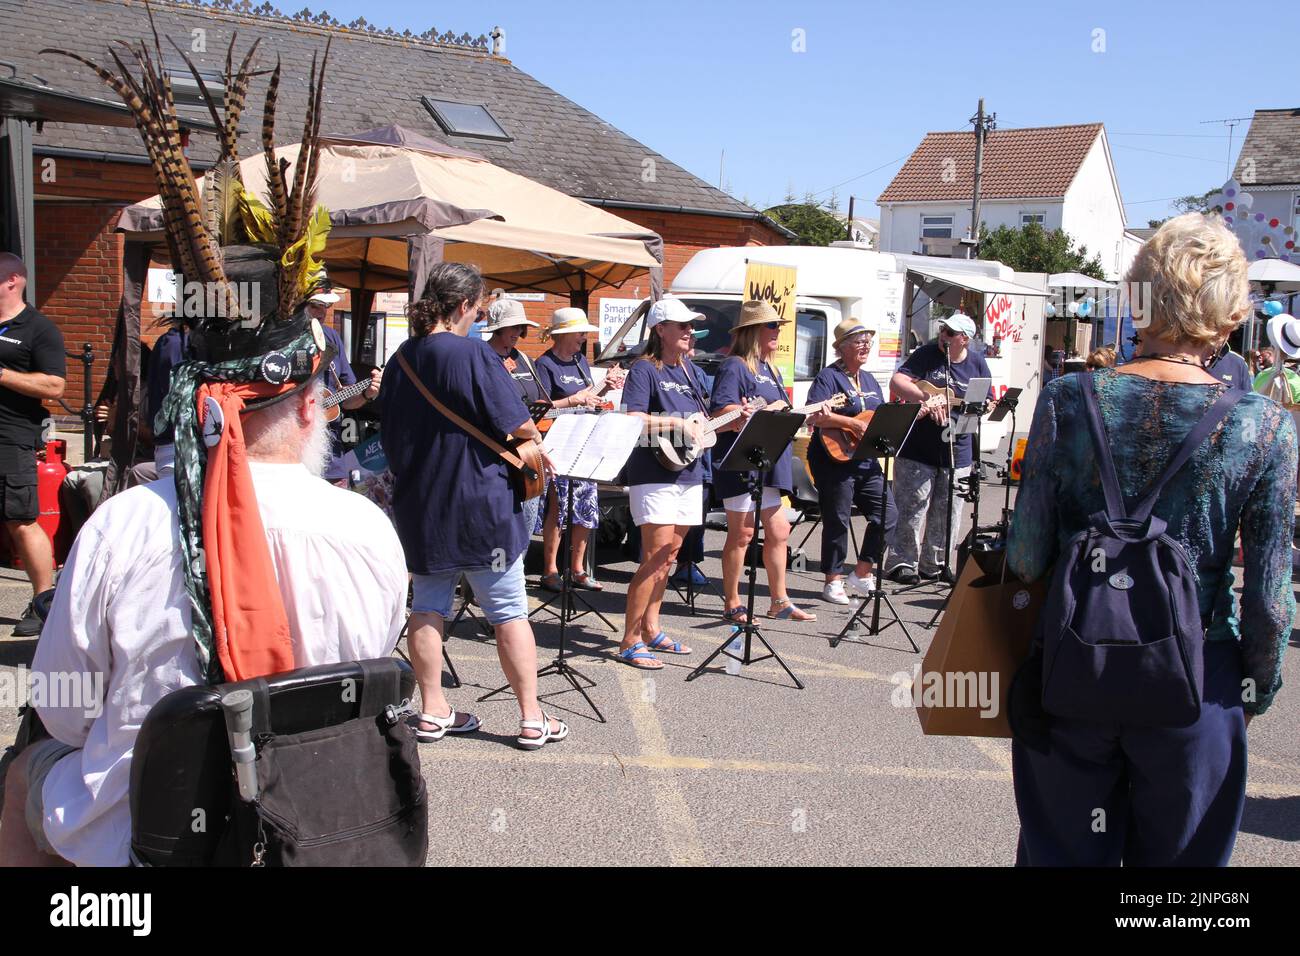 West Mersea Regatta is taking place on Mersea Island. The regatta has been run almost continually since 1838 and is organised by volunteers. Simply Strummers ukulele and guitar band entertain the crowd. Stock Photo